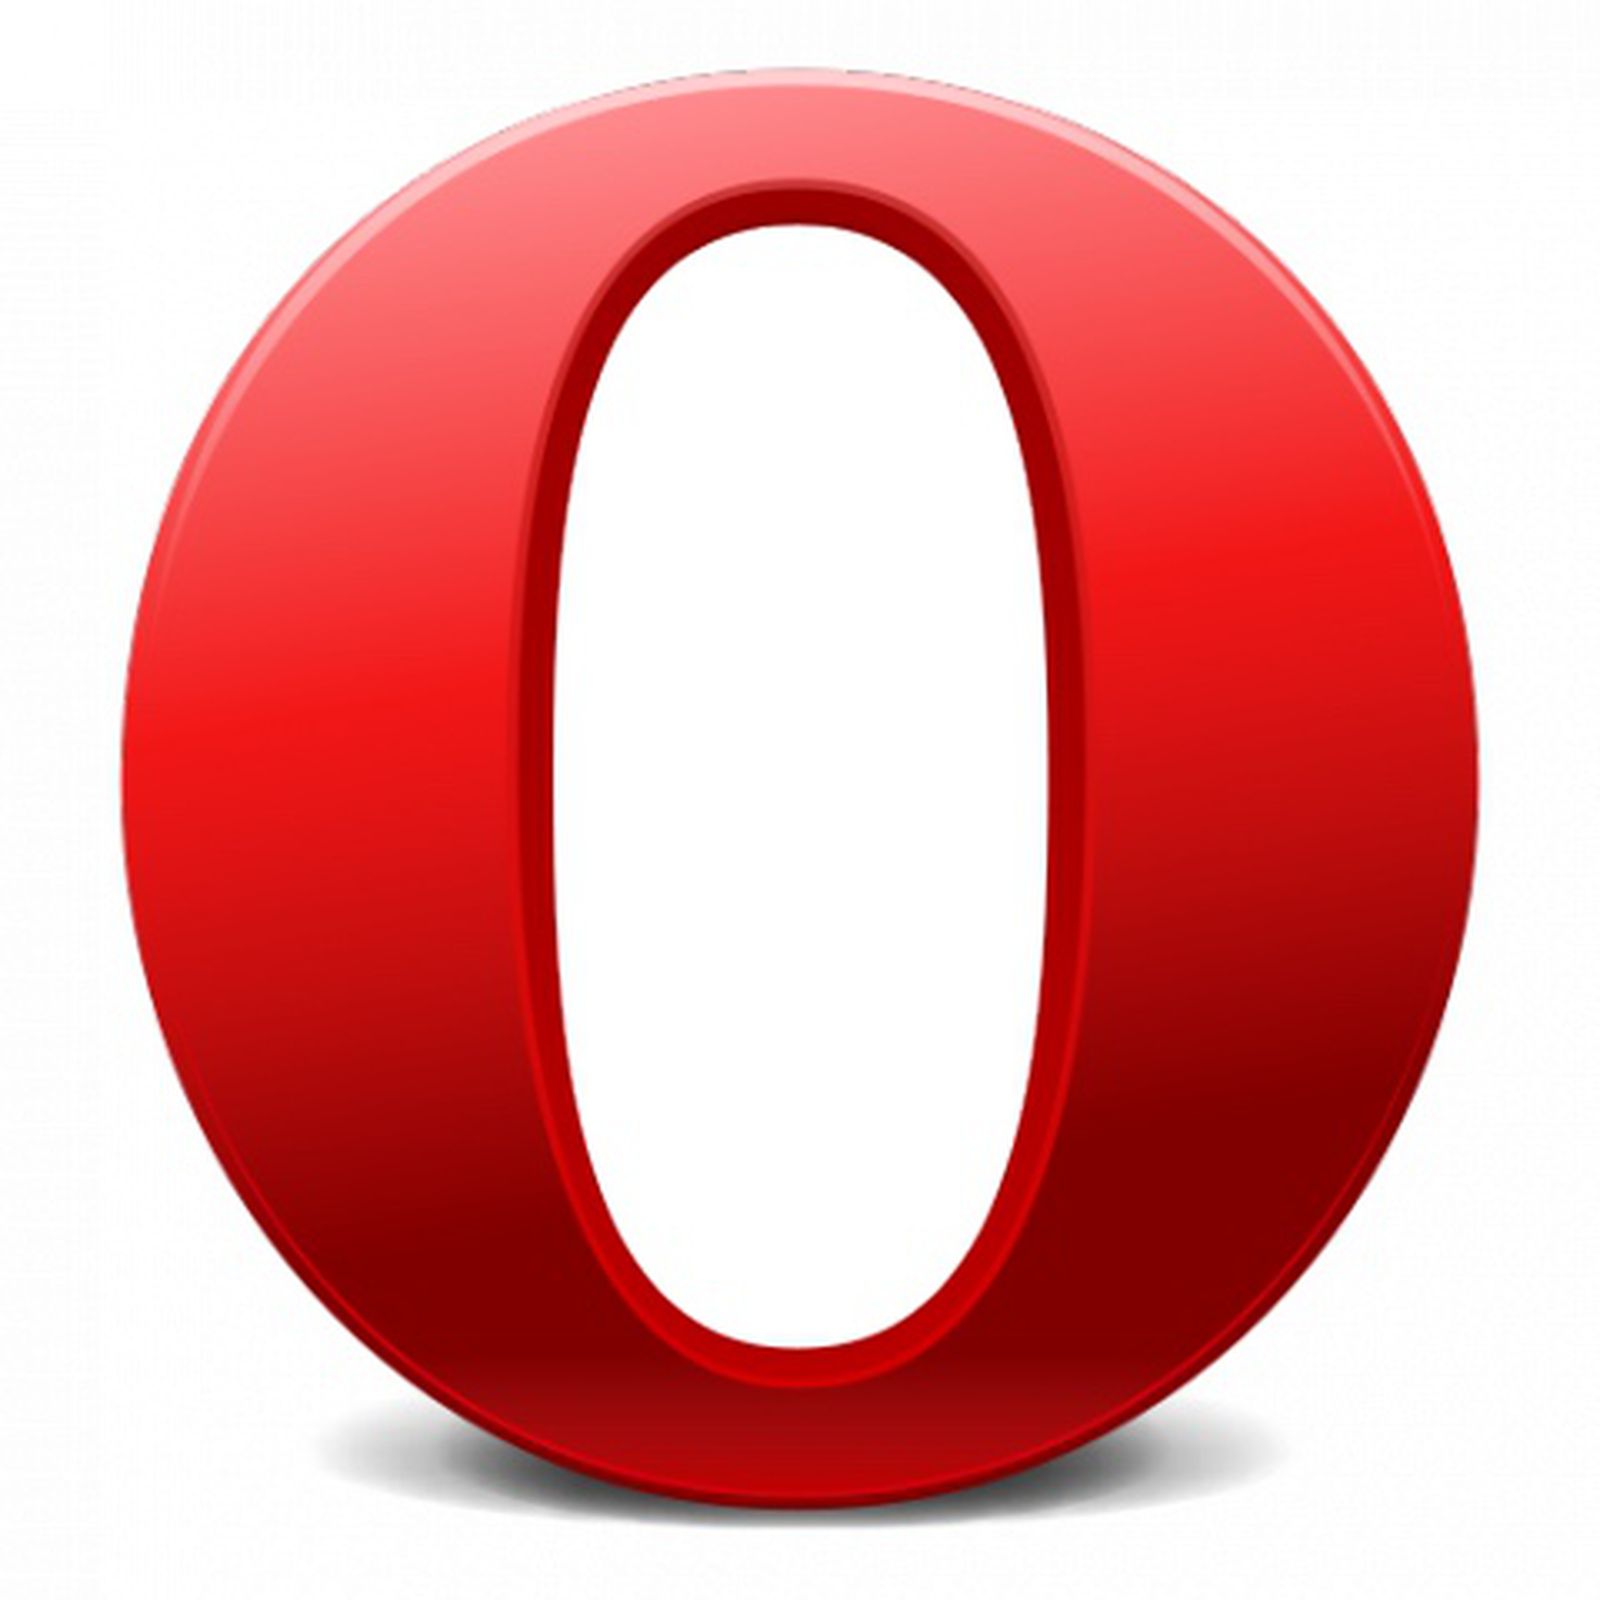 review of opera for mac